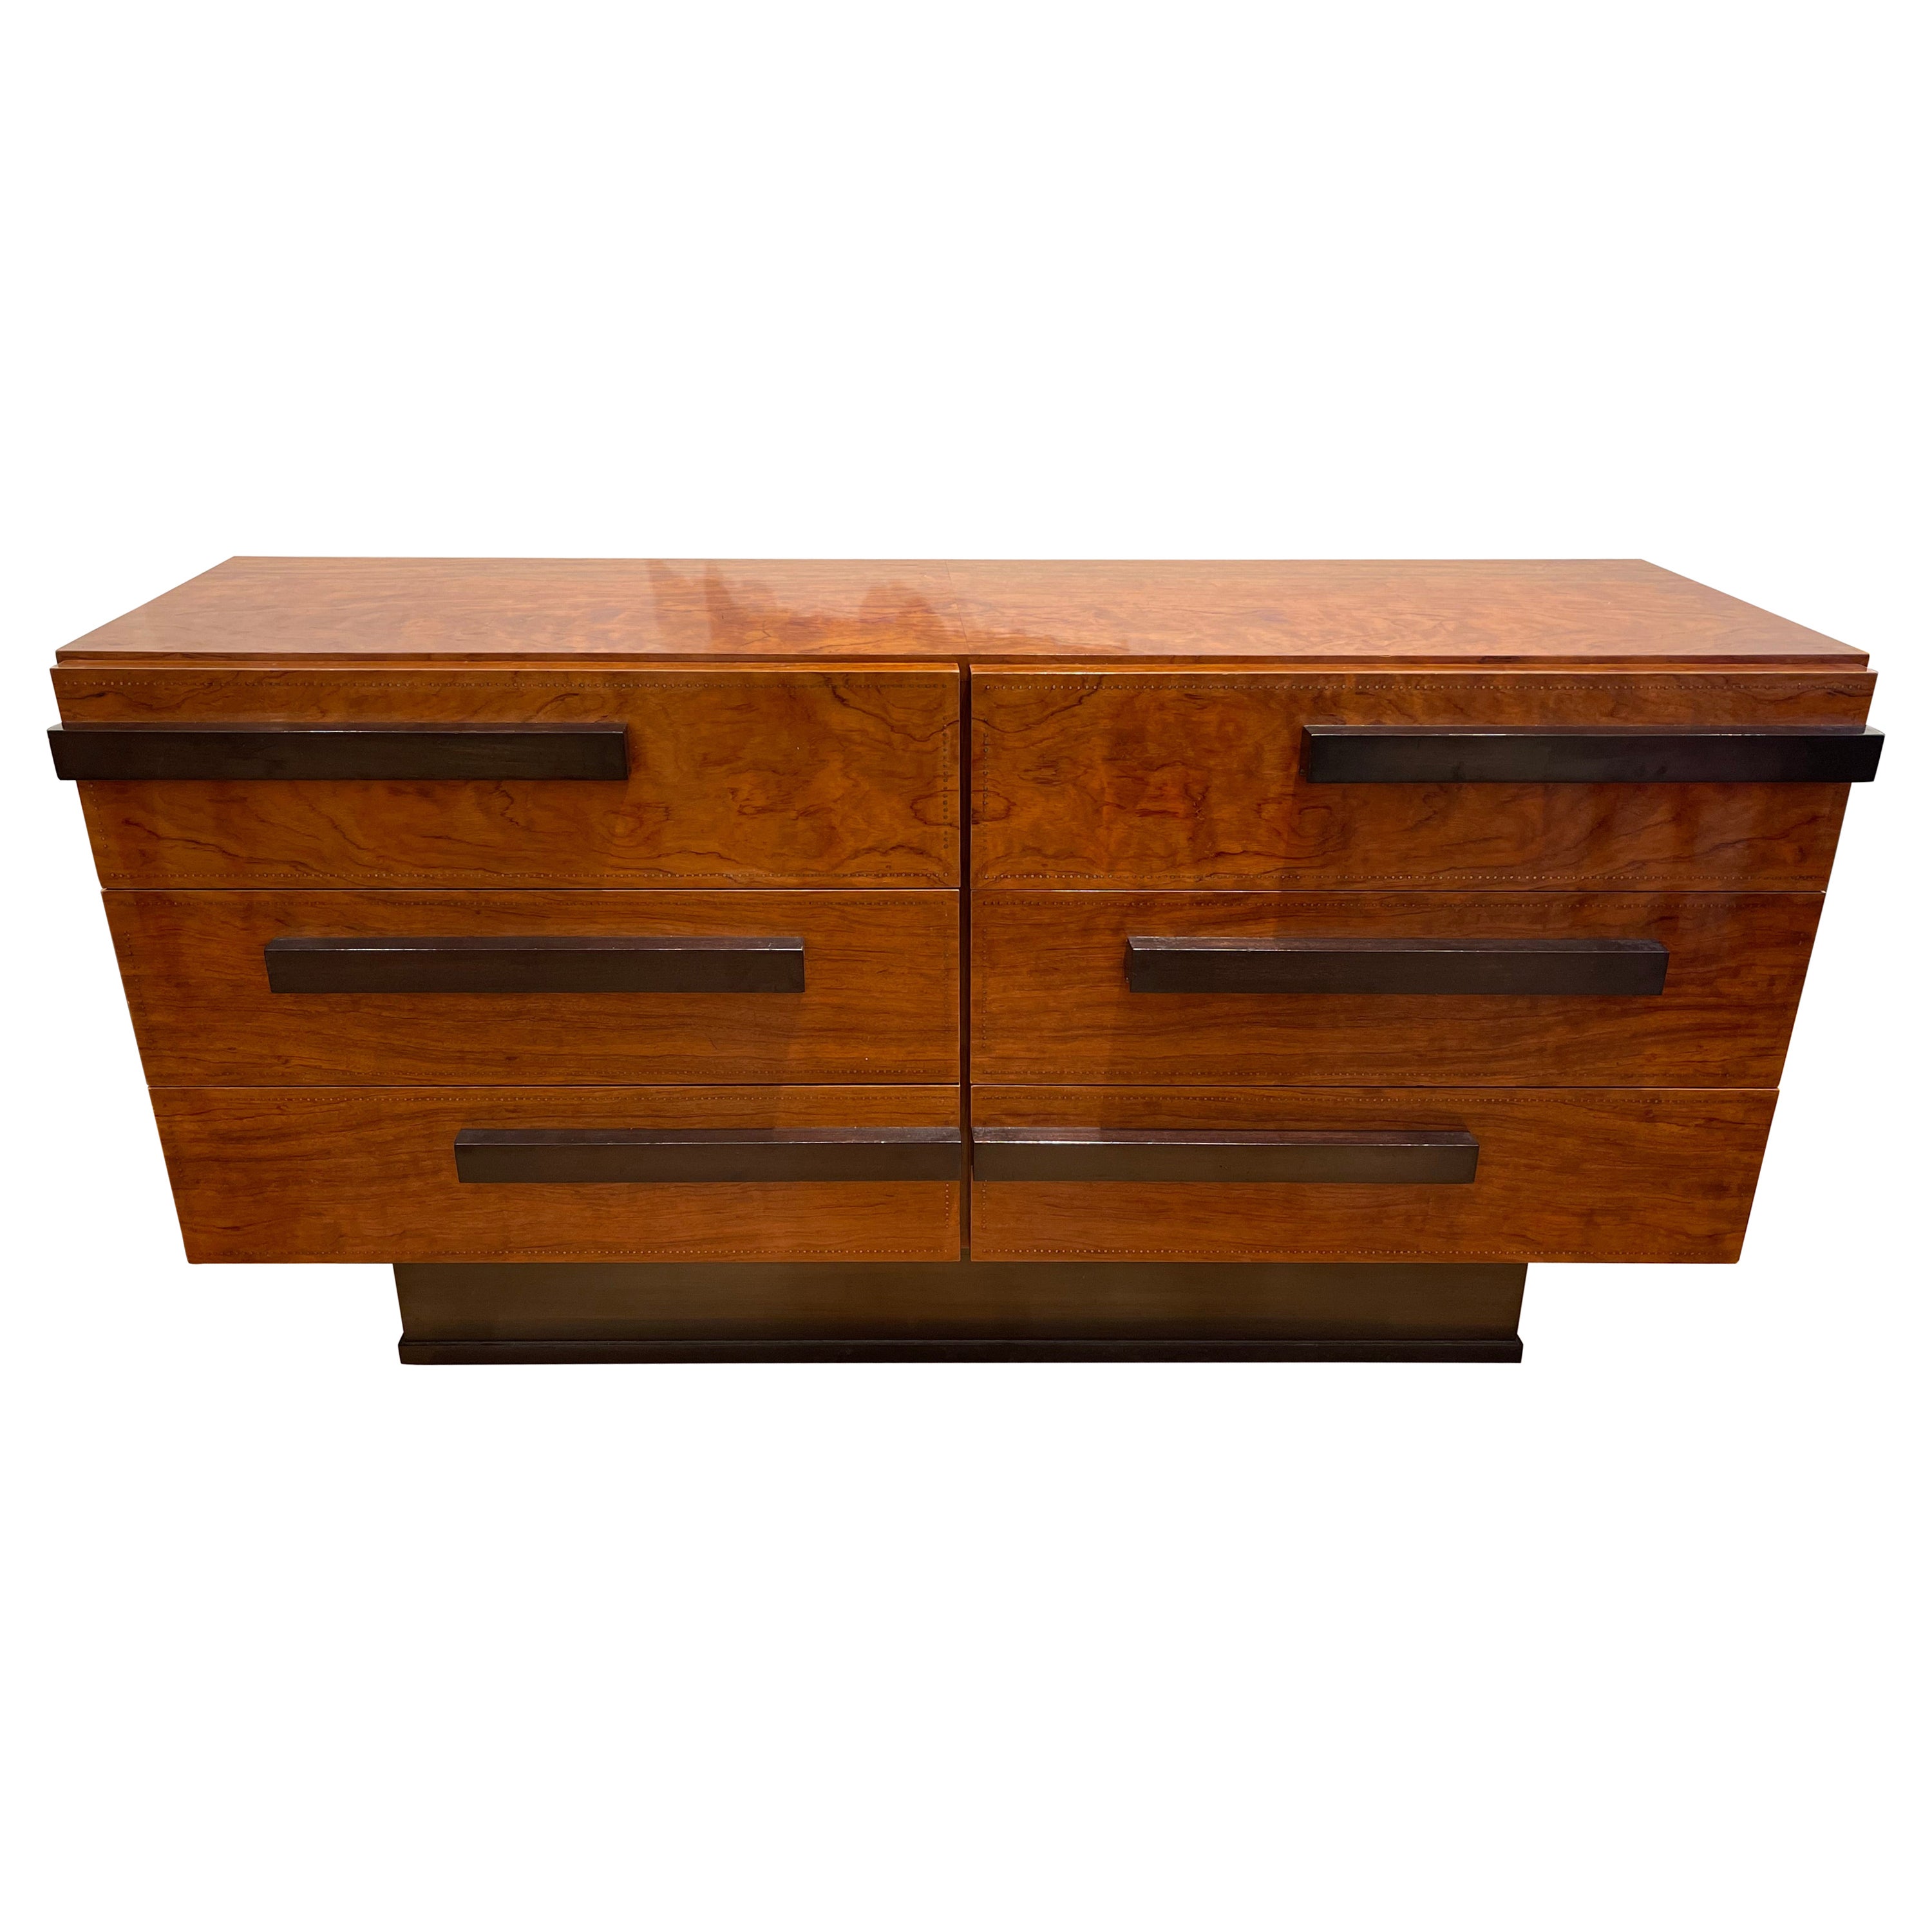 Stunning Chest of Drawers by André Sornay, Art Déco, France, circa 1932